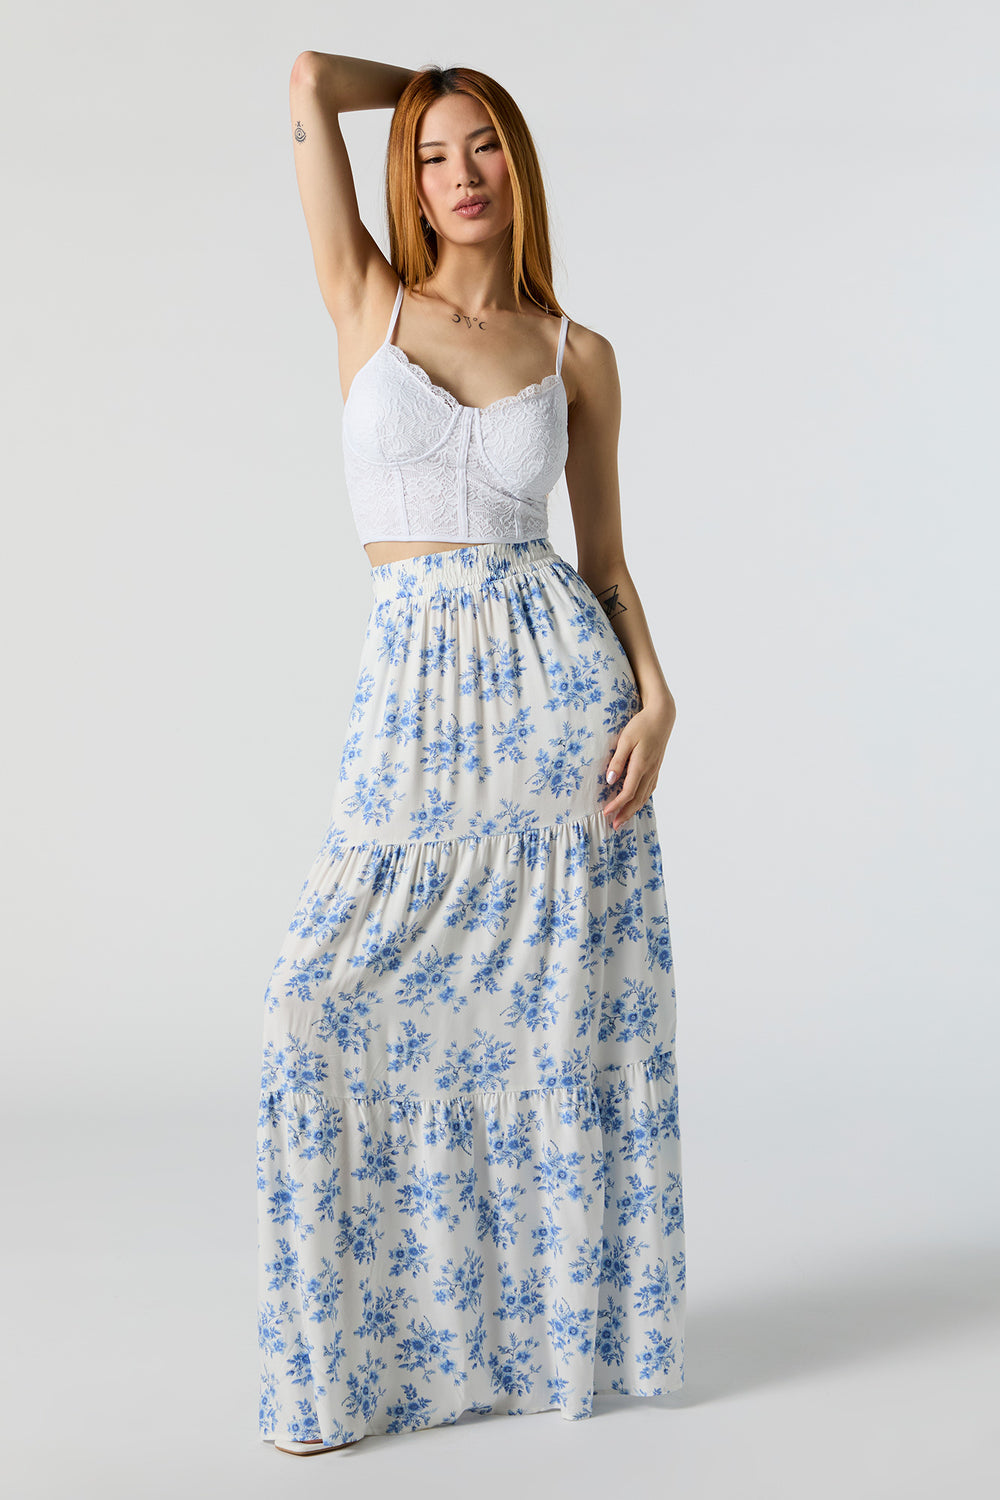 White Floral High Rise Tiered Maxi Skirt White Floral High Rise Tiered Maxi Skirt 1